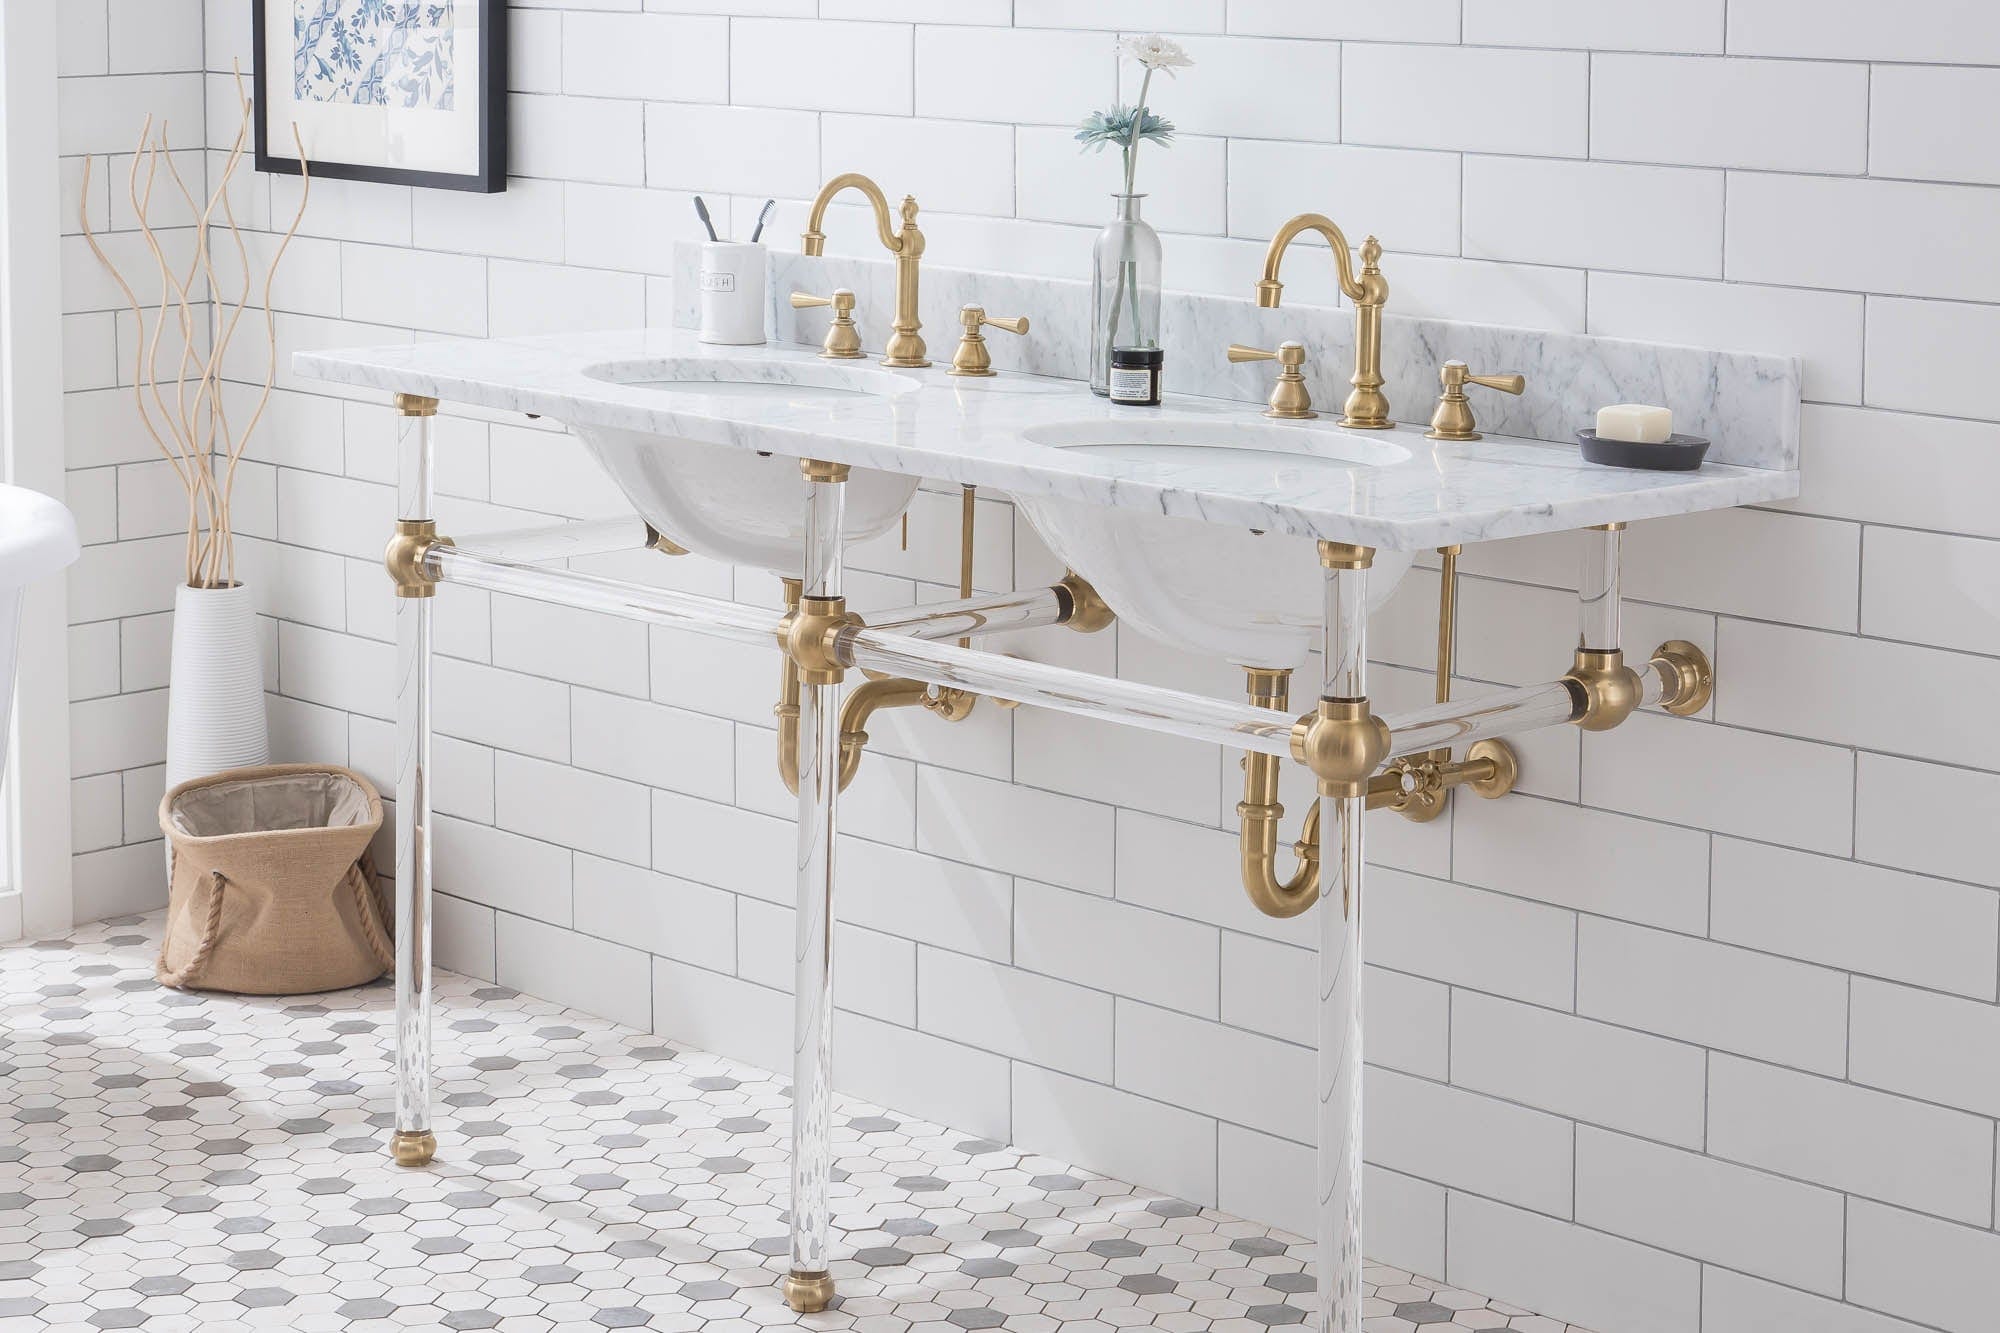 Empire 60 Inch Wide Double Wash Stand, P-Trap, Counter Top with Basin, and F2-0012 Faucet included in Satin Gold Finish - Molaix732030762893EP60D-0612